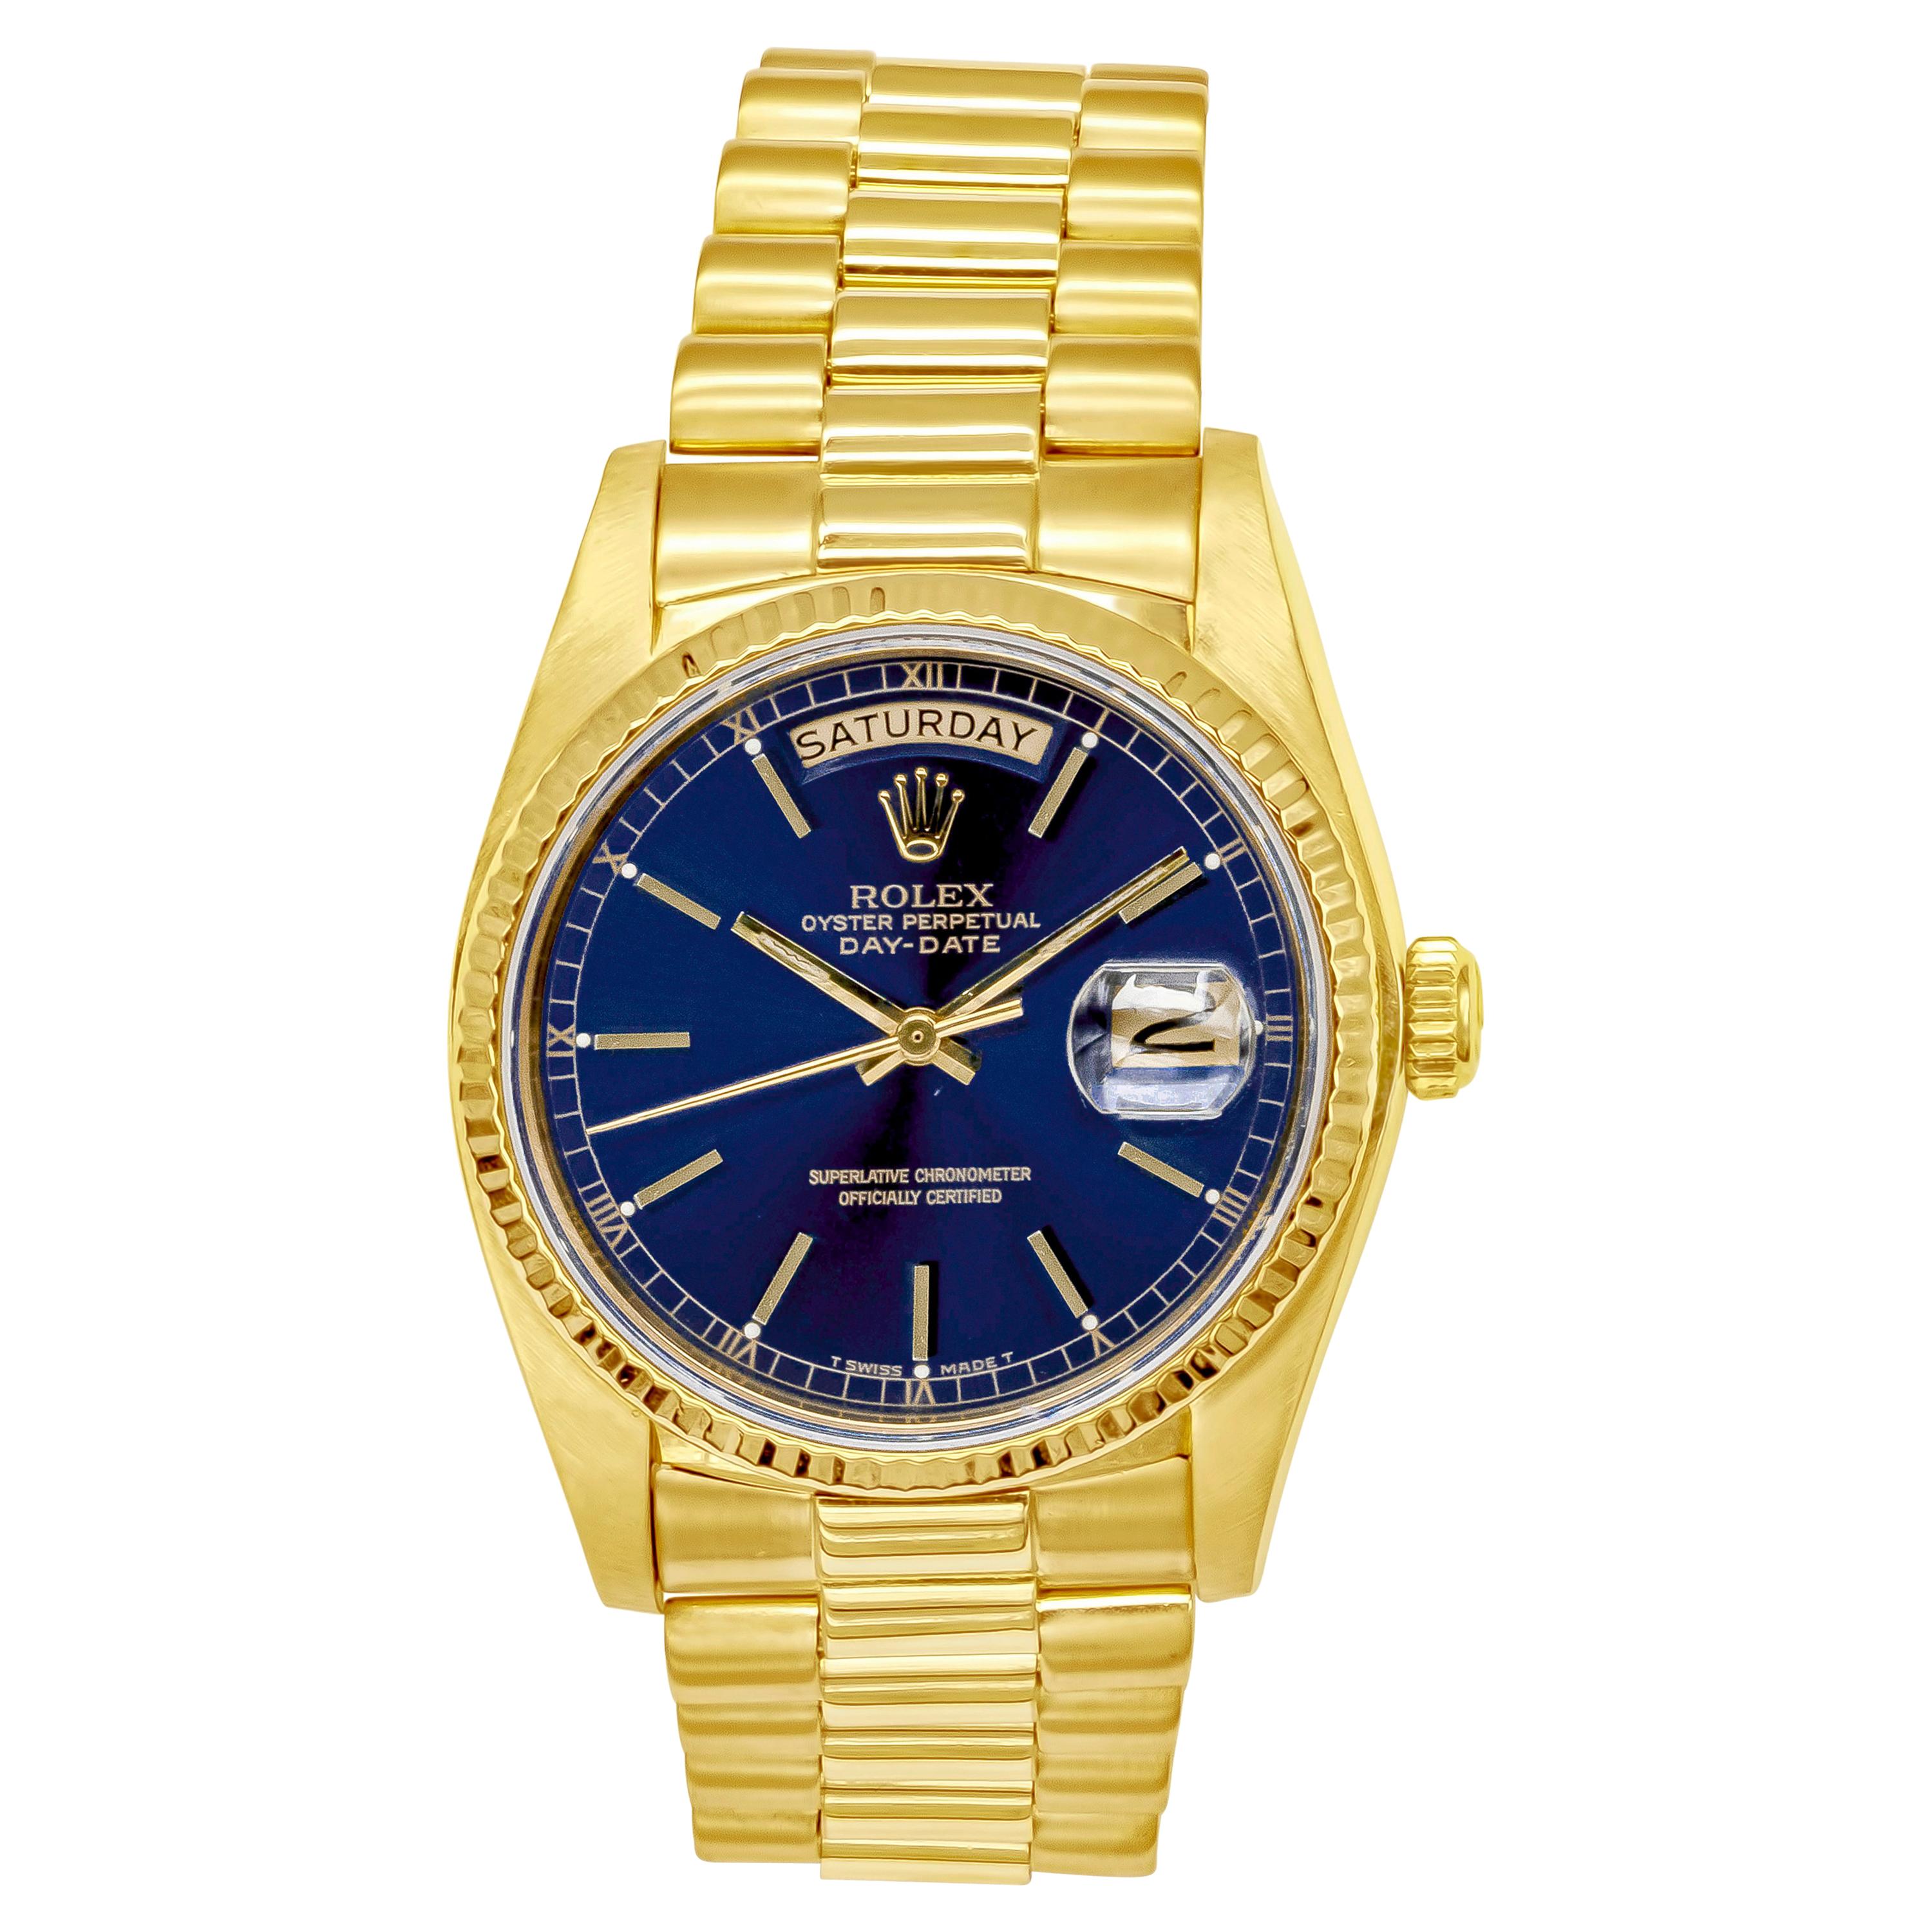 1982 Rolex President Day-Date Wristwatch Made in Yellow Gold, Ref. 18038 For Sale